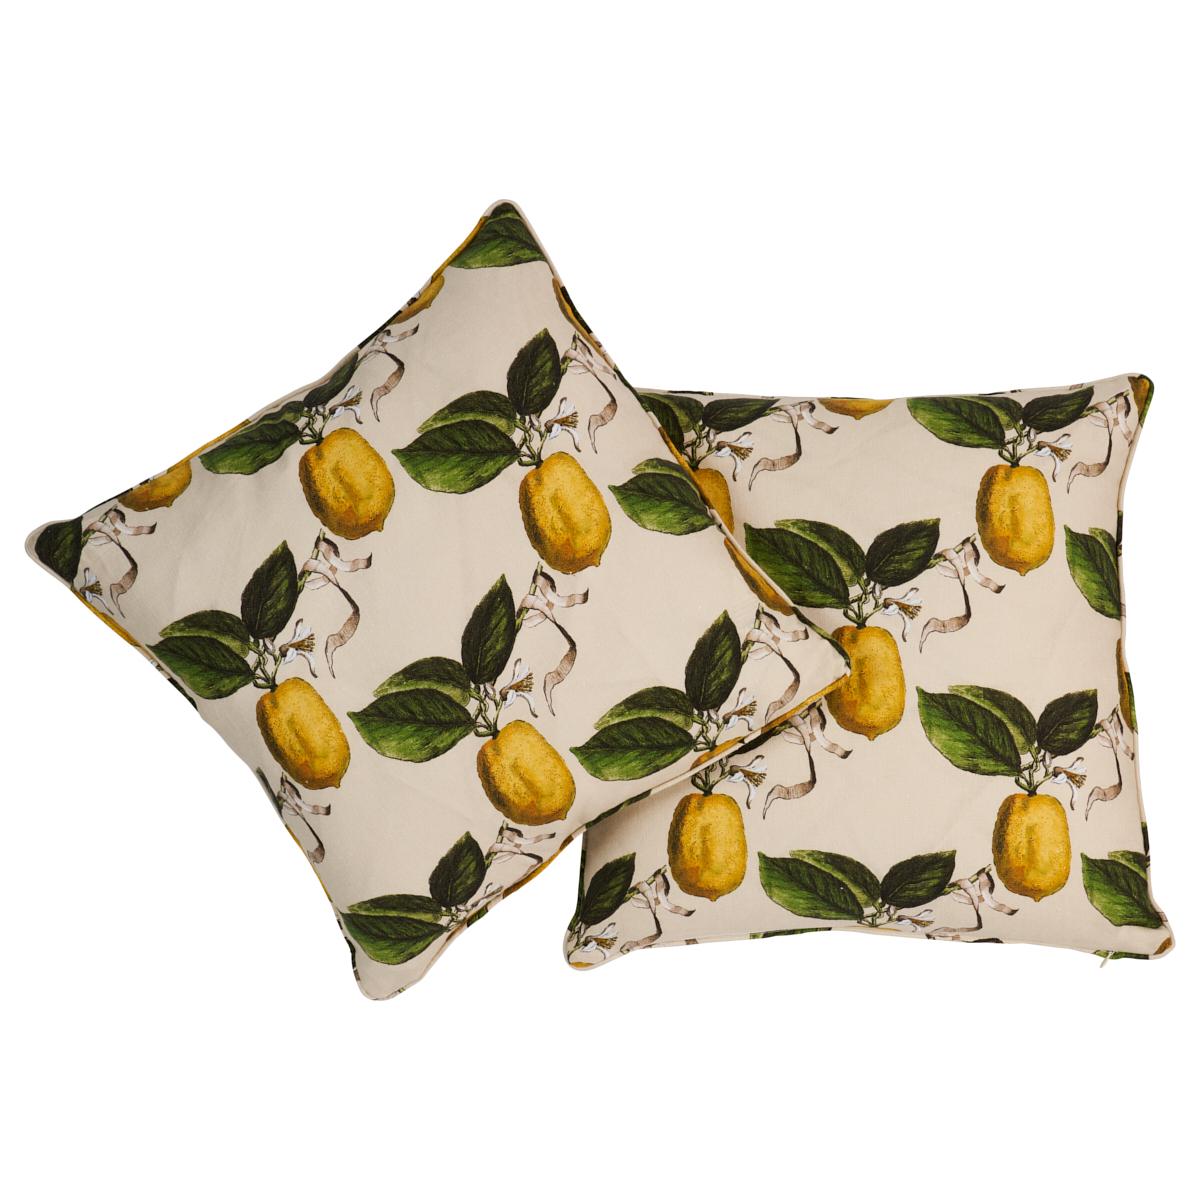 This pillow features Le Citron by Johnson Hartig for Libertine for Schumacher with a self welt finish. Le Citron in natural is a wonderfully charming fabric design by Johnson Hartig of Libertine. Printed on pure linen, this whimsical lattice of